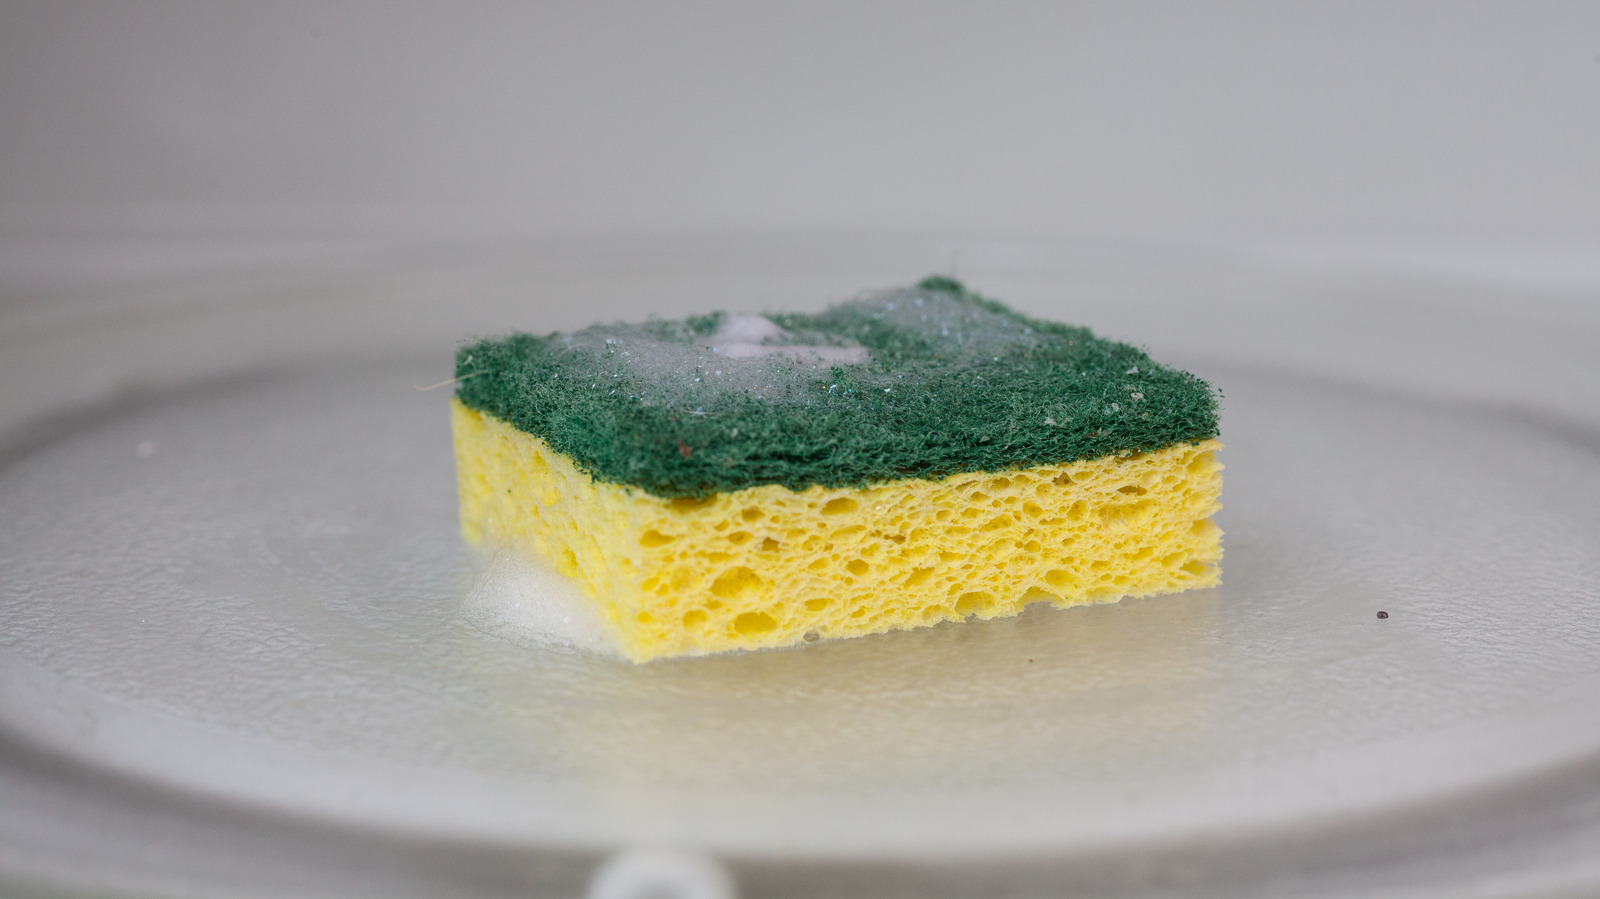 How to Clean and Sanitize a Sponge in the Microwave